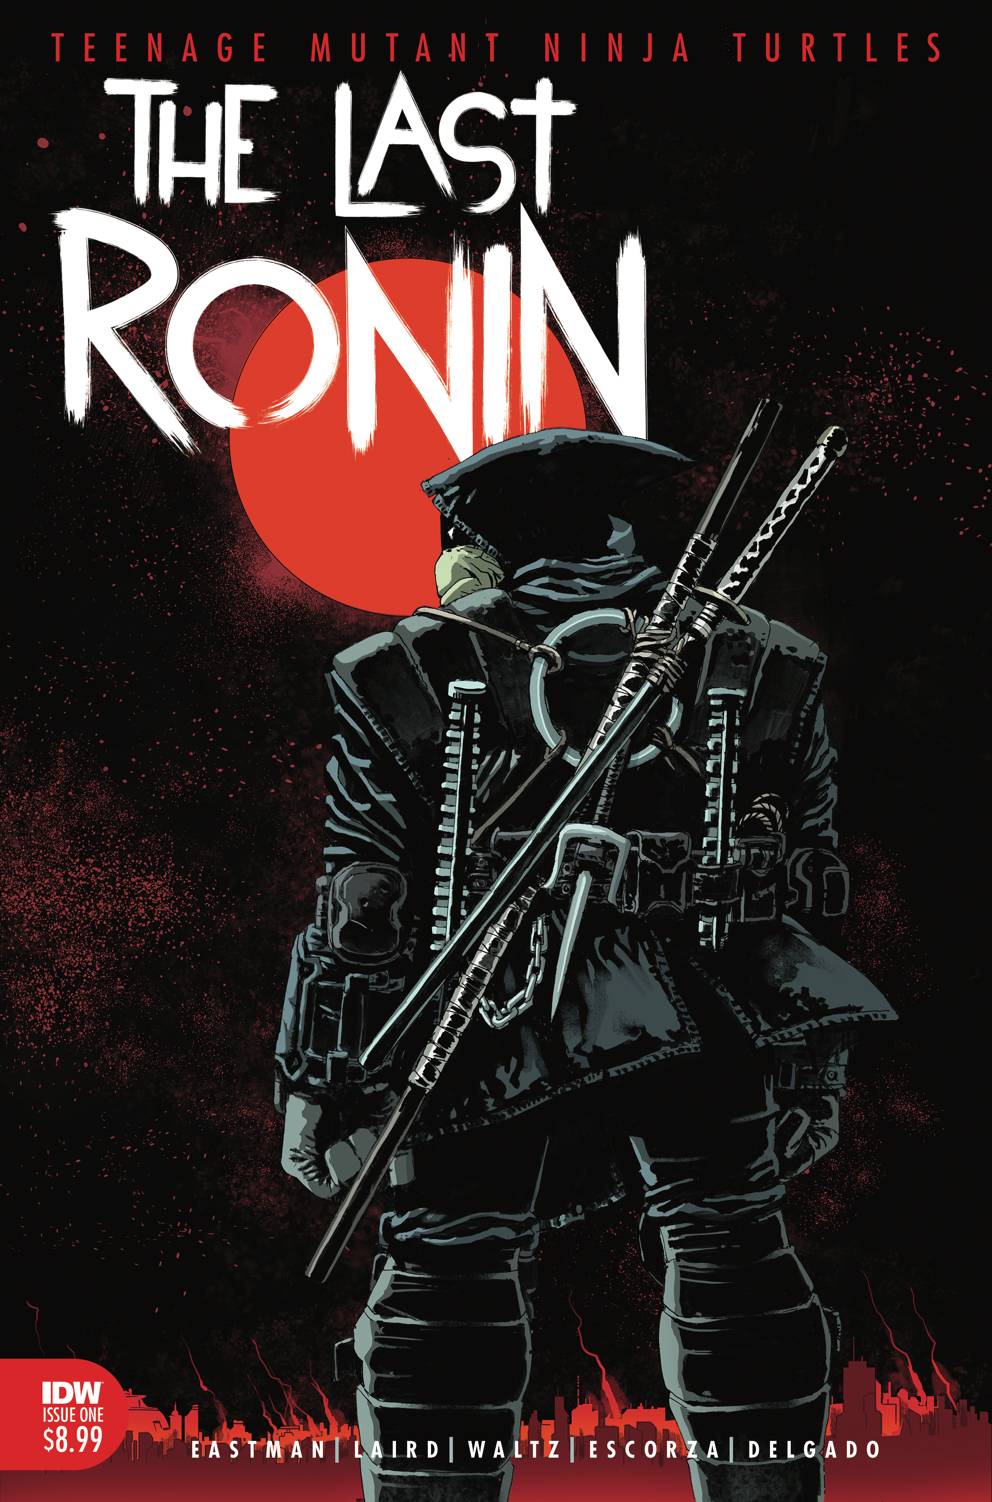 TMNT THE LAST RONIN #1 (EASTMAN A COVER)